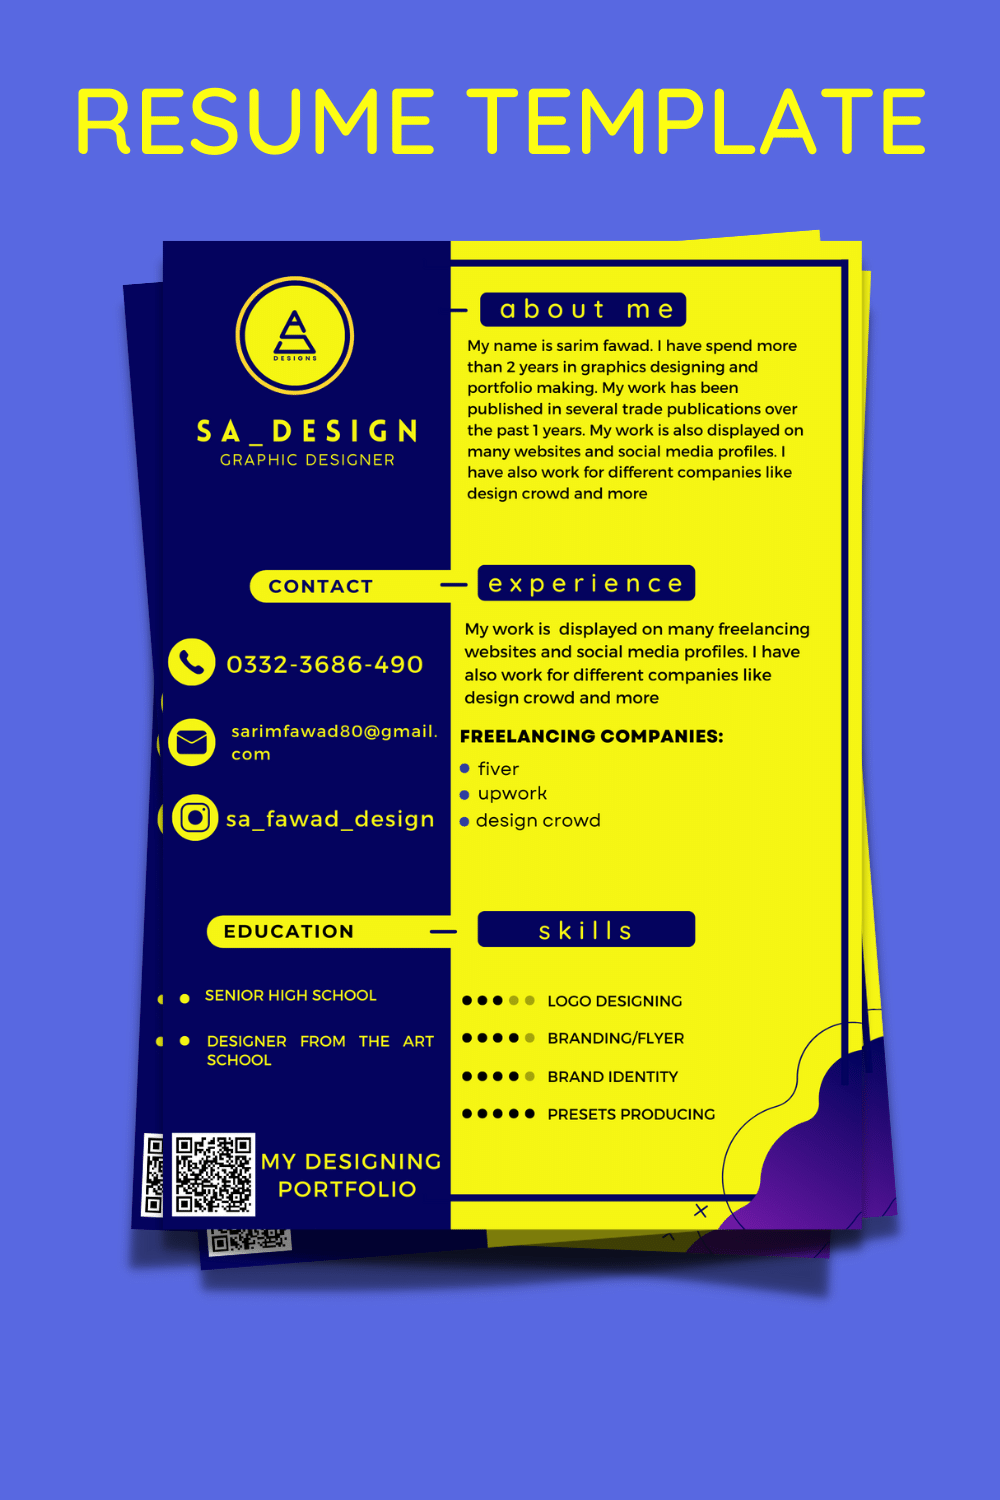 Irresistible resume template image in blue and yellow colors.